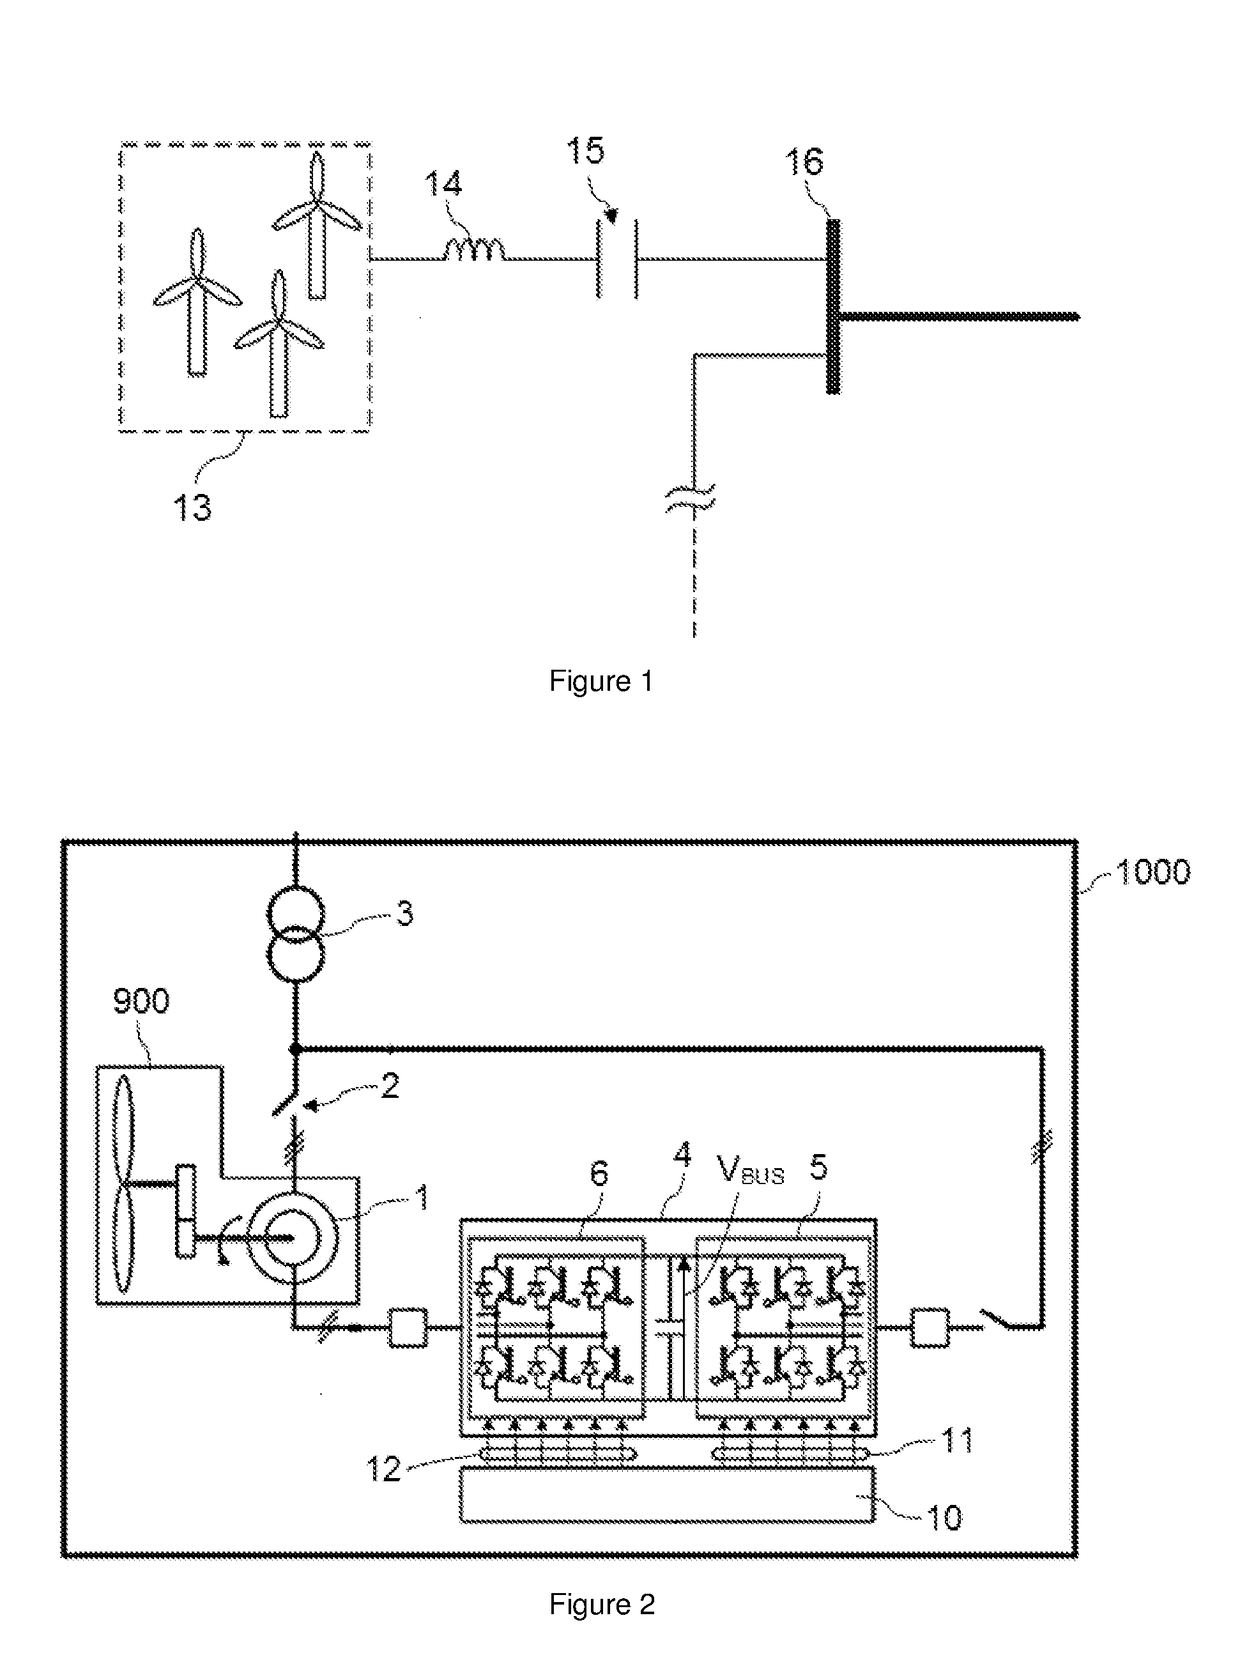 Control method for a system comprising a frequency converter connected to a power grid